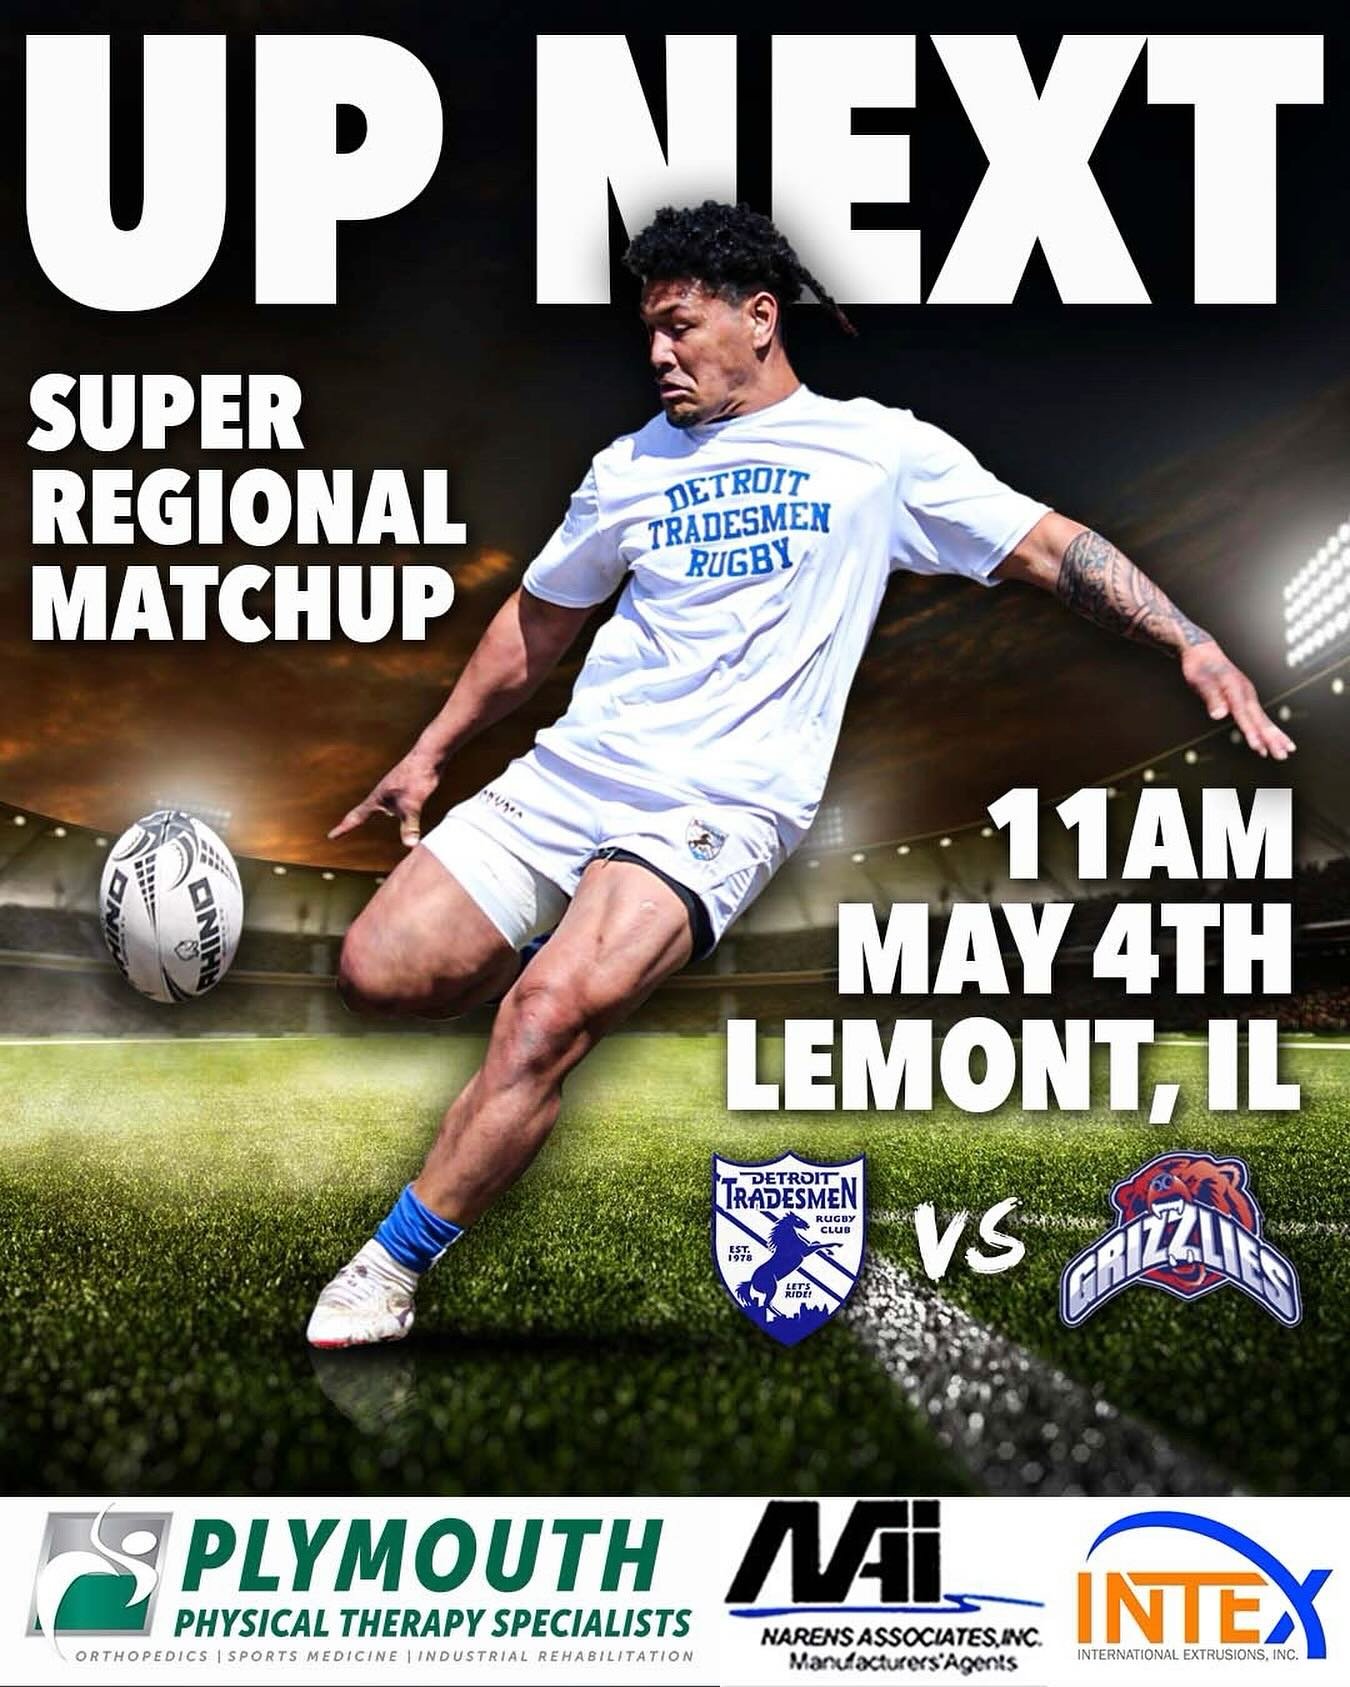 What&rsquo;s better than playoff rugby?! 

Only a few more days until our business trip to Lemont, IL for the Midwest Super Regionals! Saturday will see the boys taking on @springsrugby and hopefully we will be on to the finals on Sunday to punch our